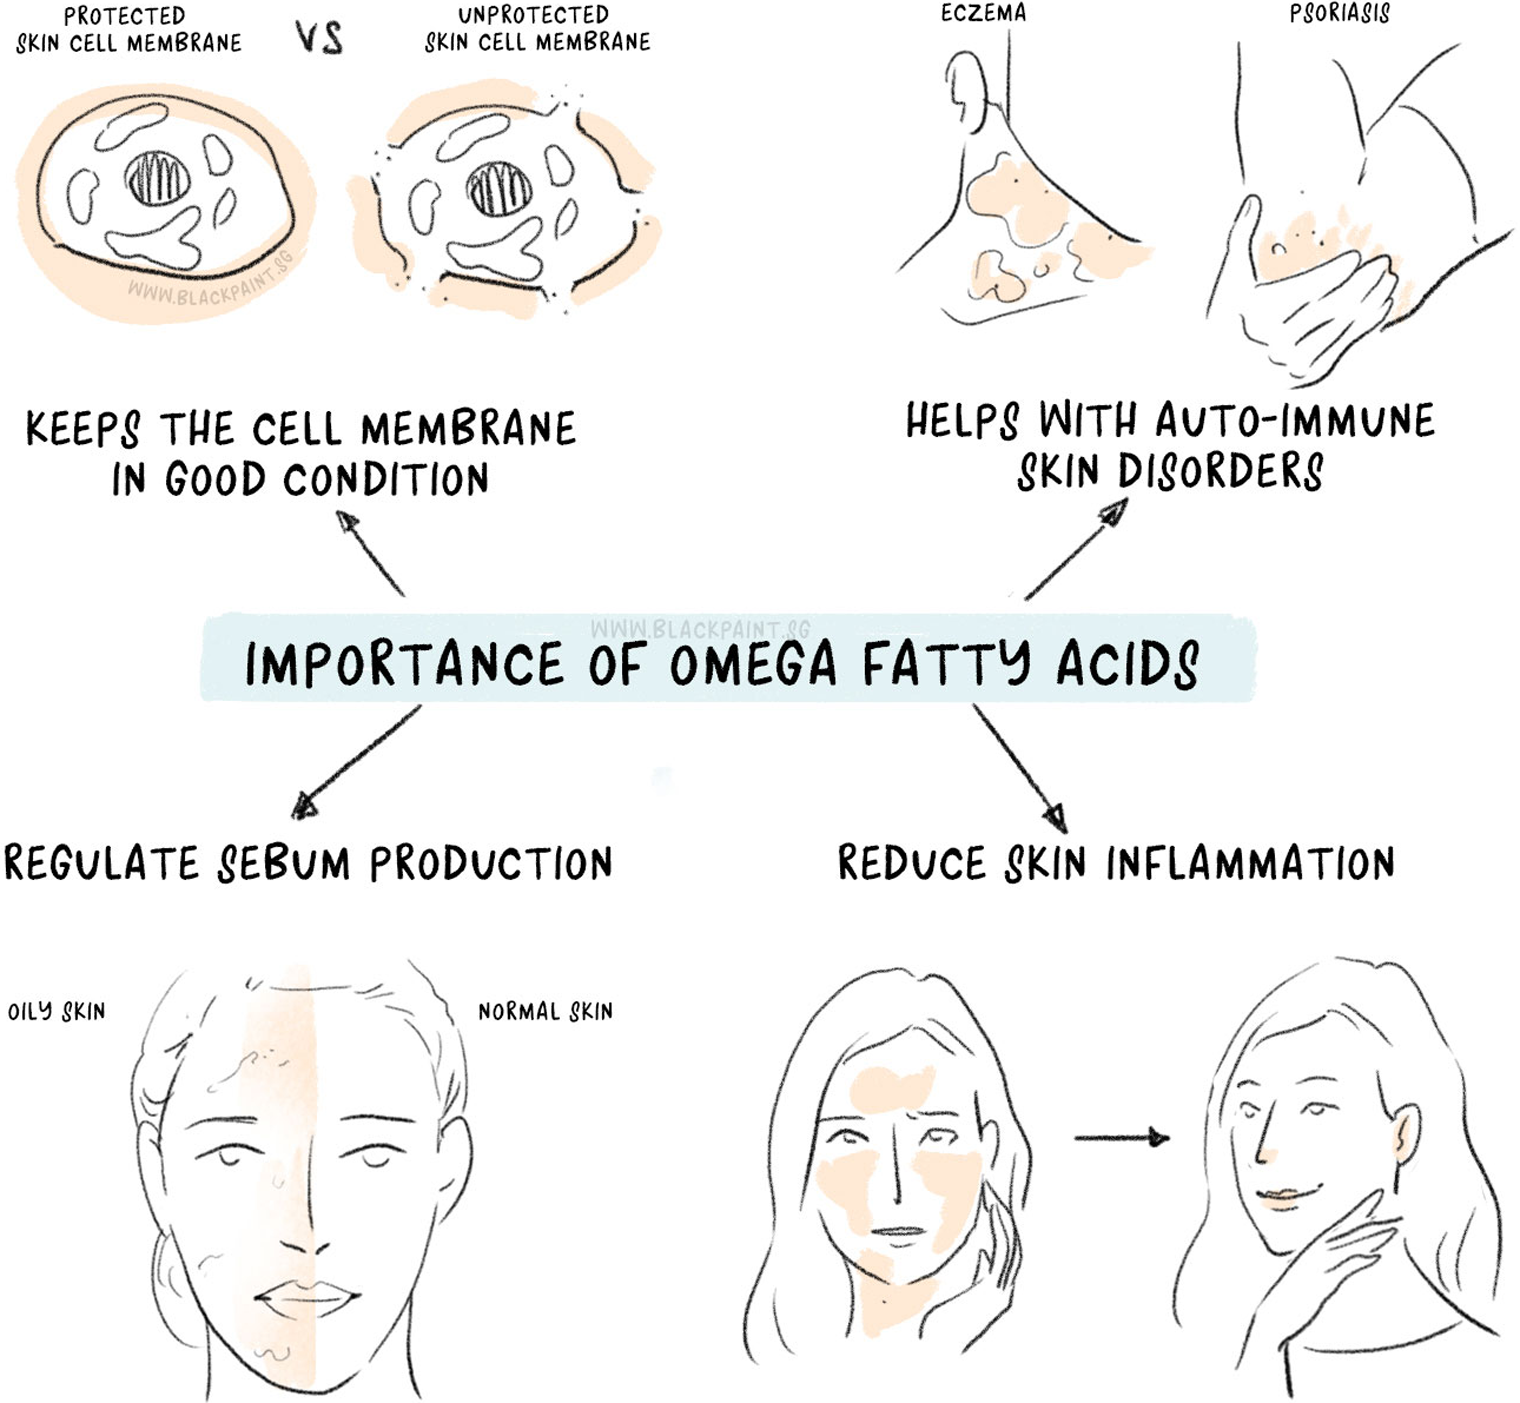 illustration of Omega fatty acids are not made in our bodies, so it is important to consume from diet for your health.